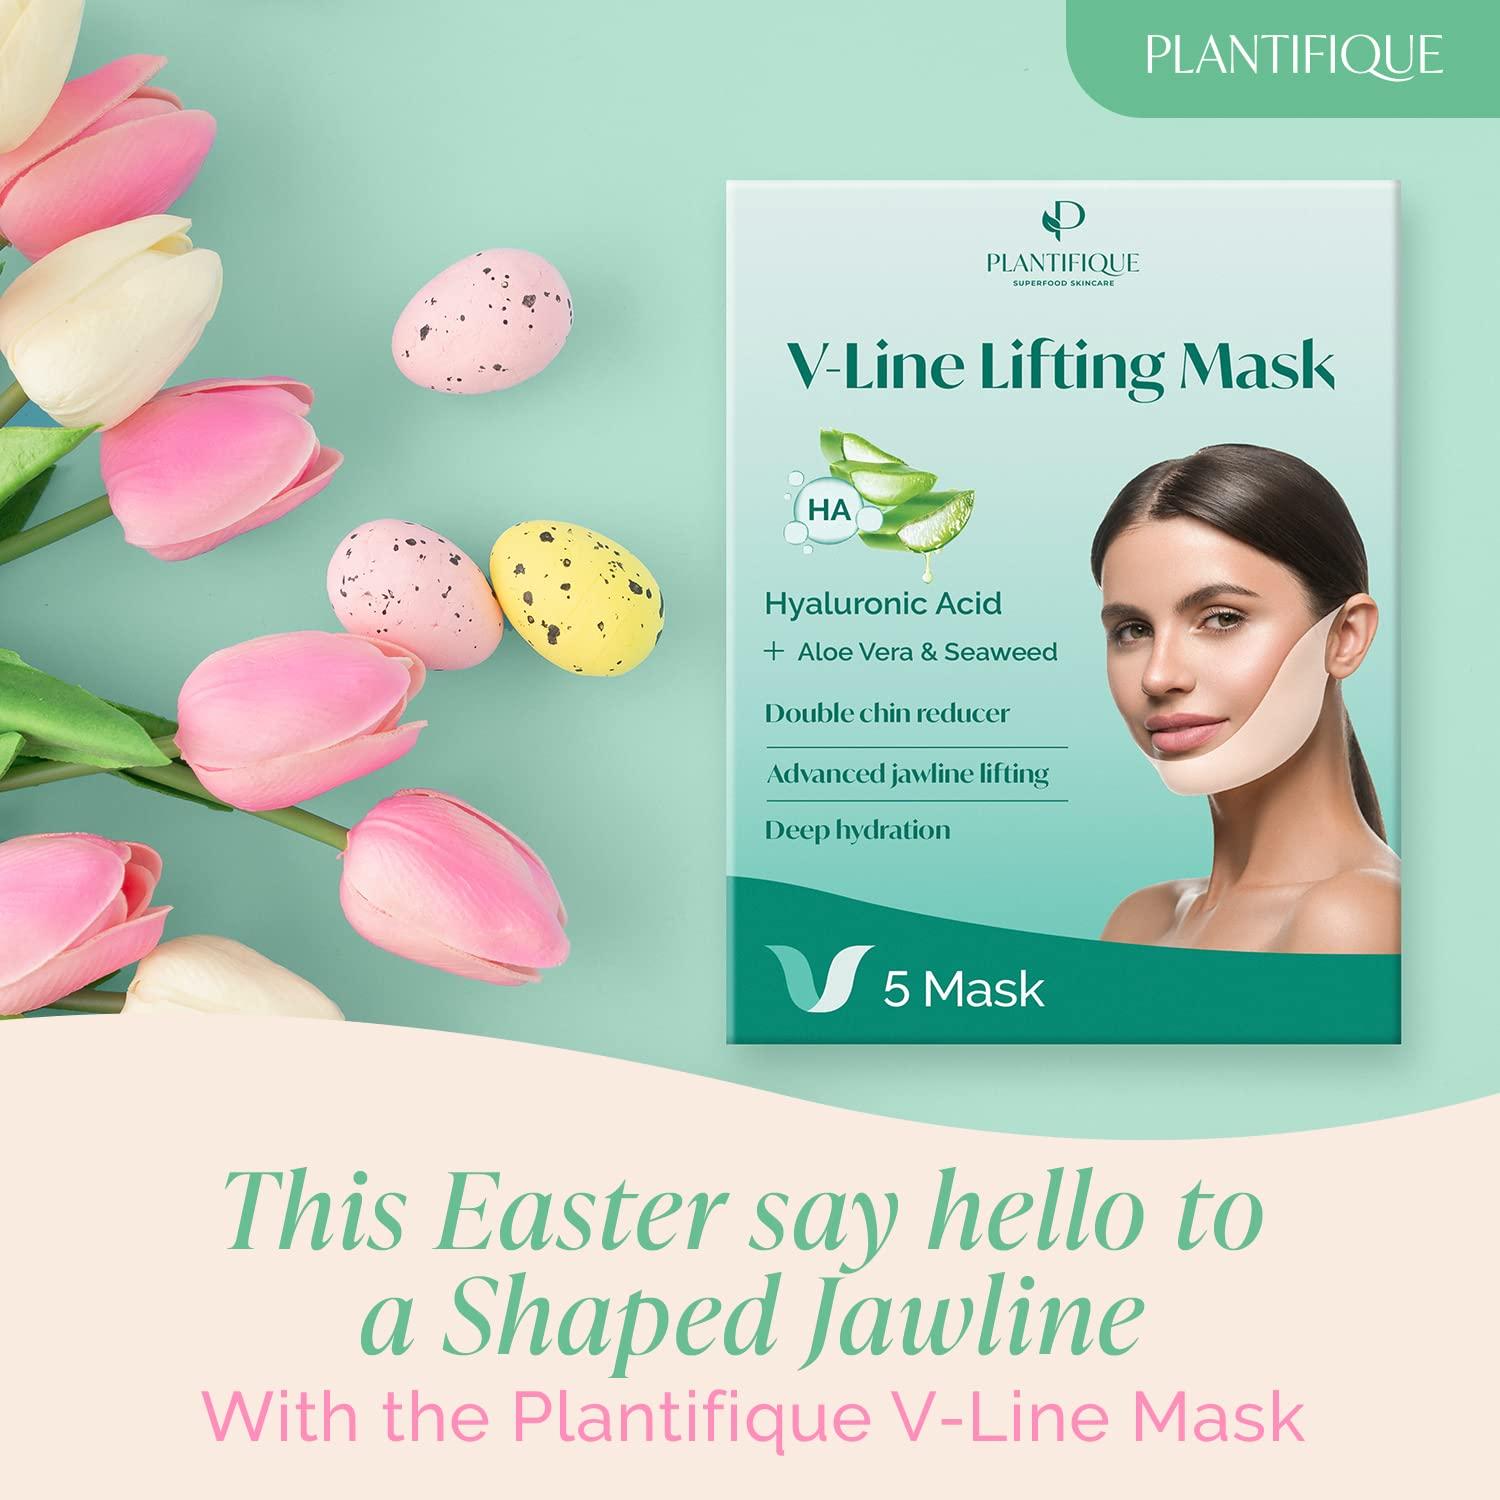 PLANTIFIQUE V-Line Lifting Face Mask - 5 PCS V Shape Face Lift Tape Mask  for Skin Firming and Tightening - Double Chin Reducer Jawline Sculptor for  Women & Men - Anti-Aging, Contouring & Slimming